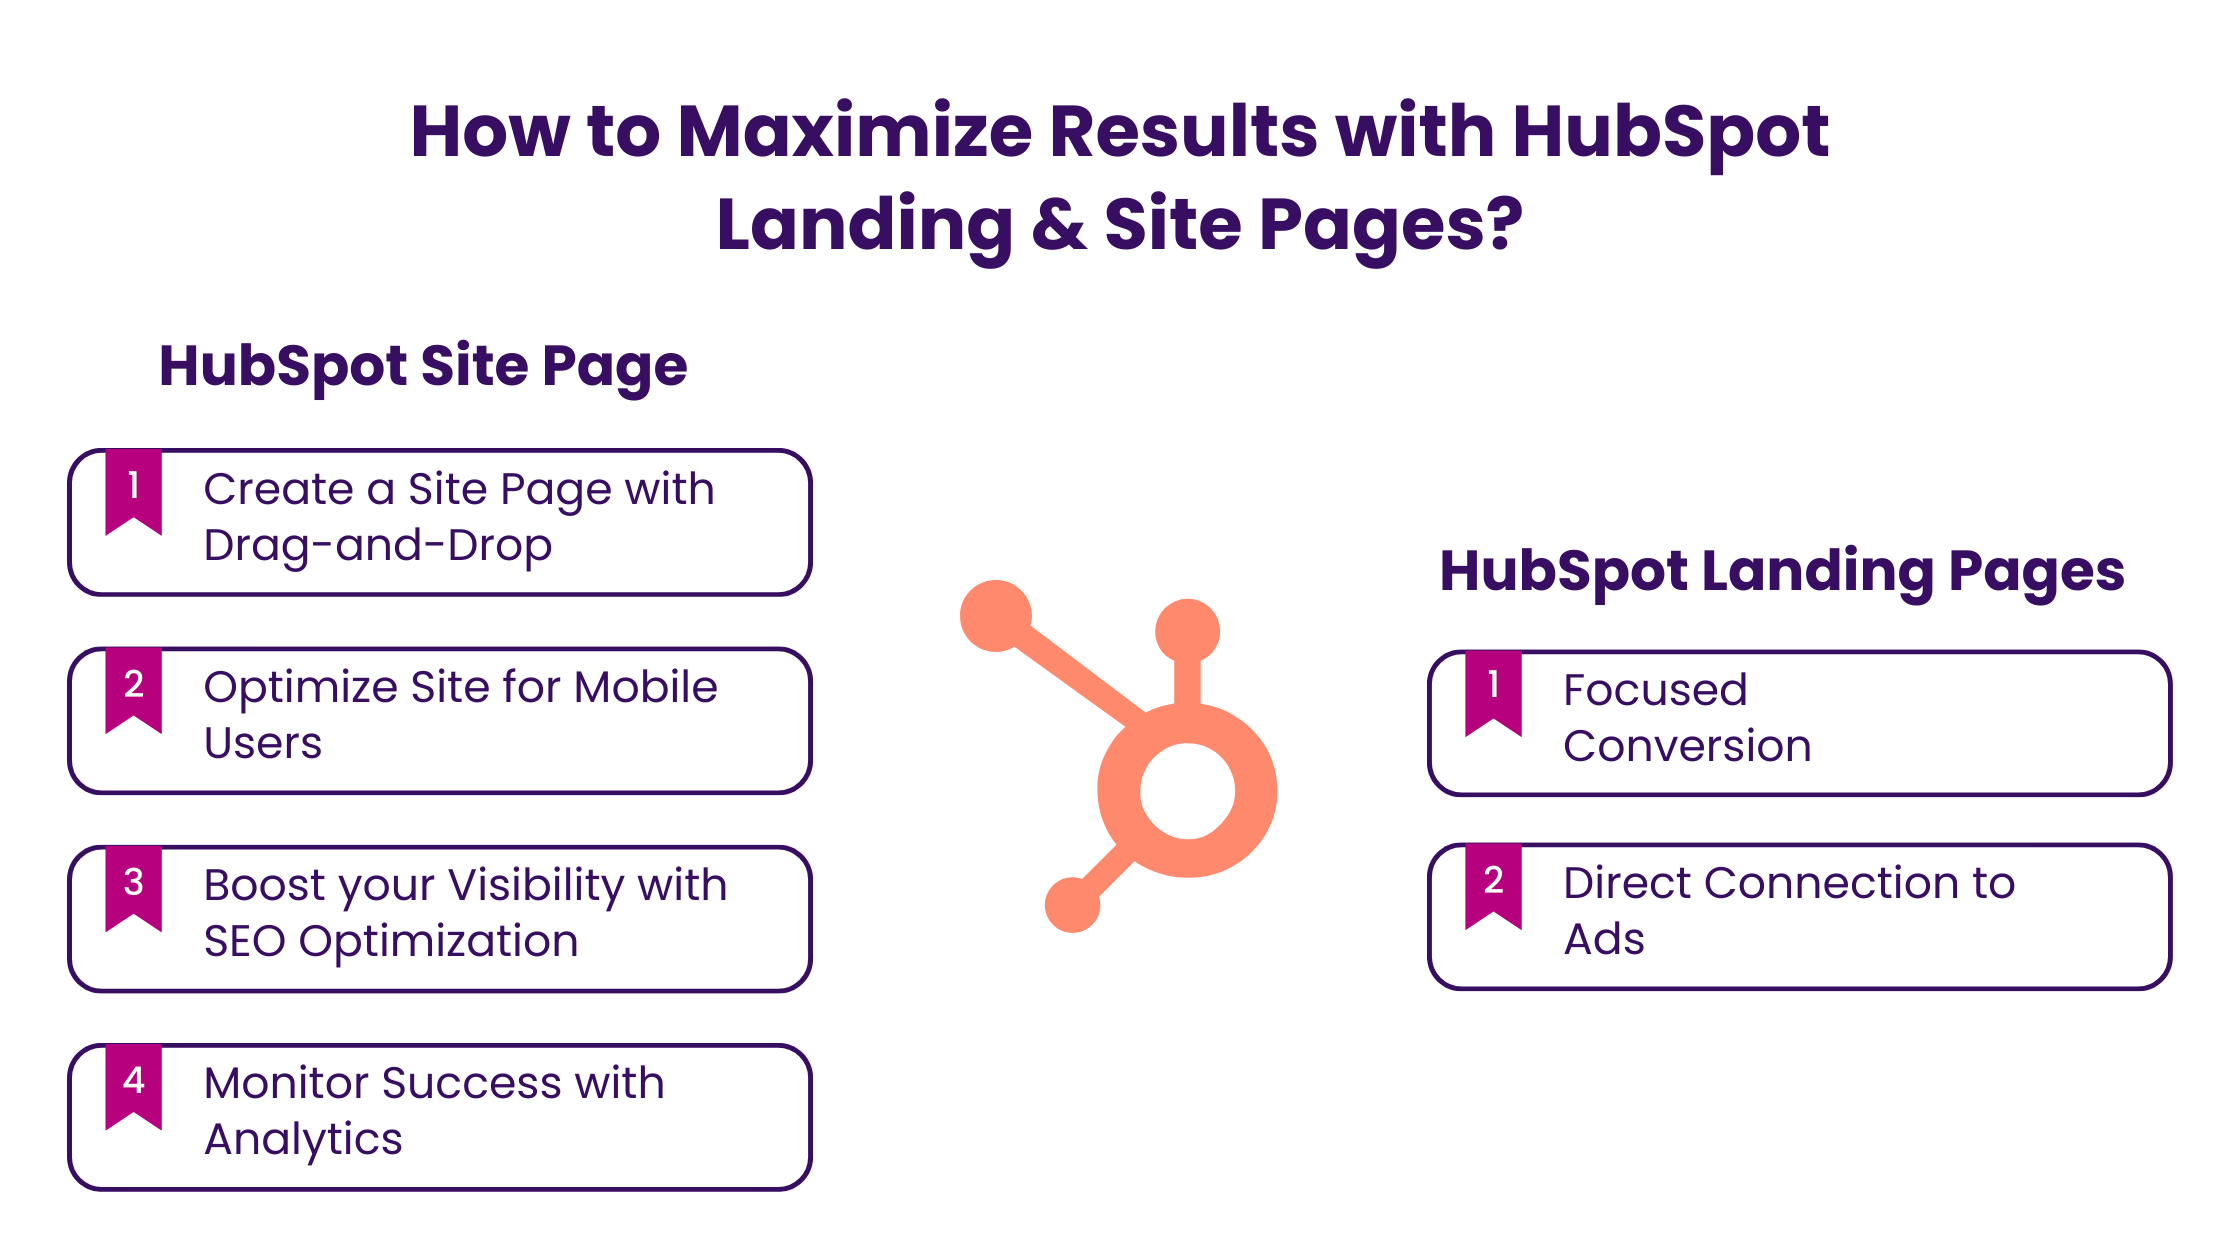 How to Maximize Results with HubSpot Landing & Site Pages